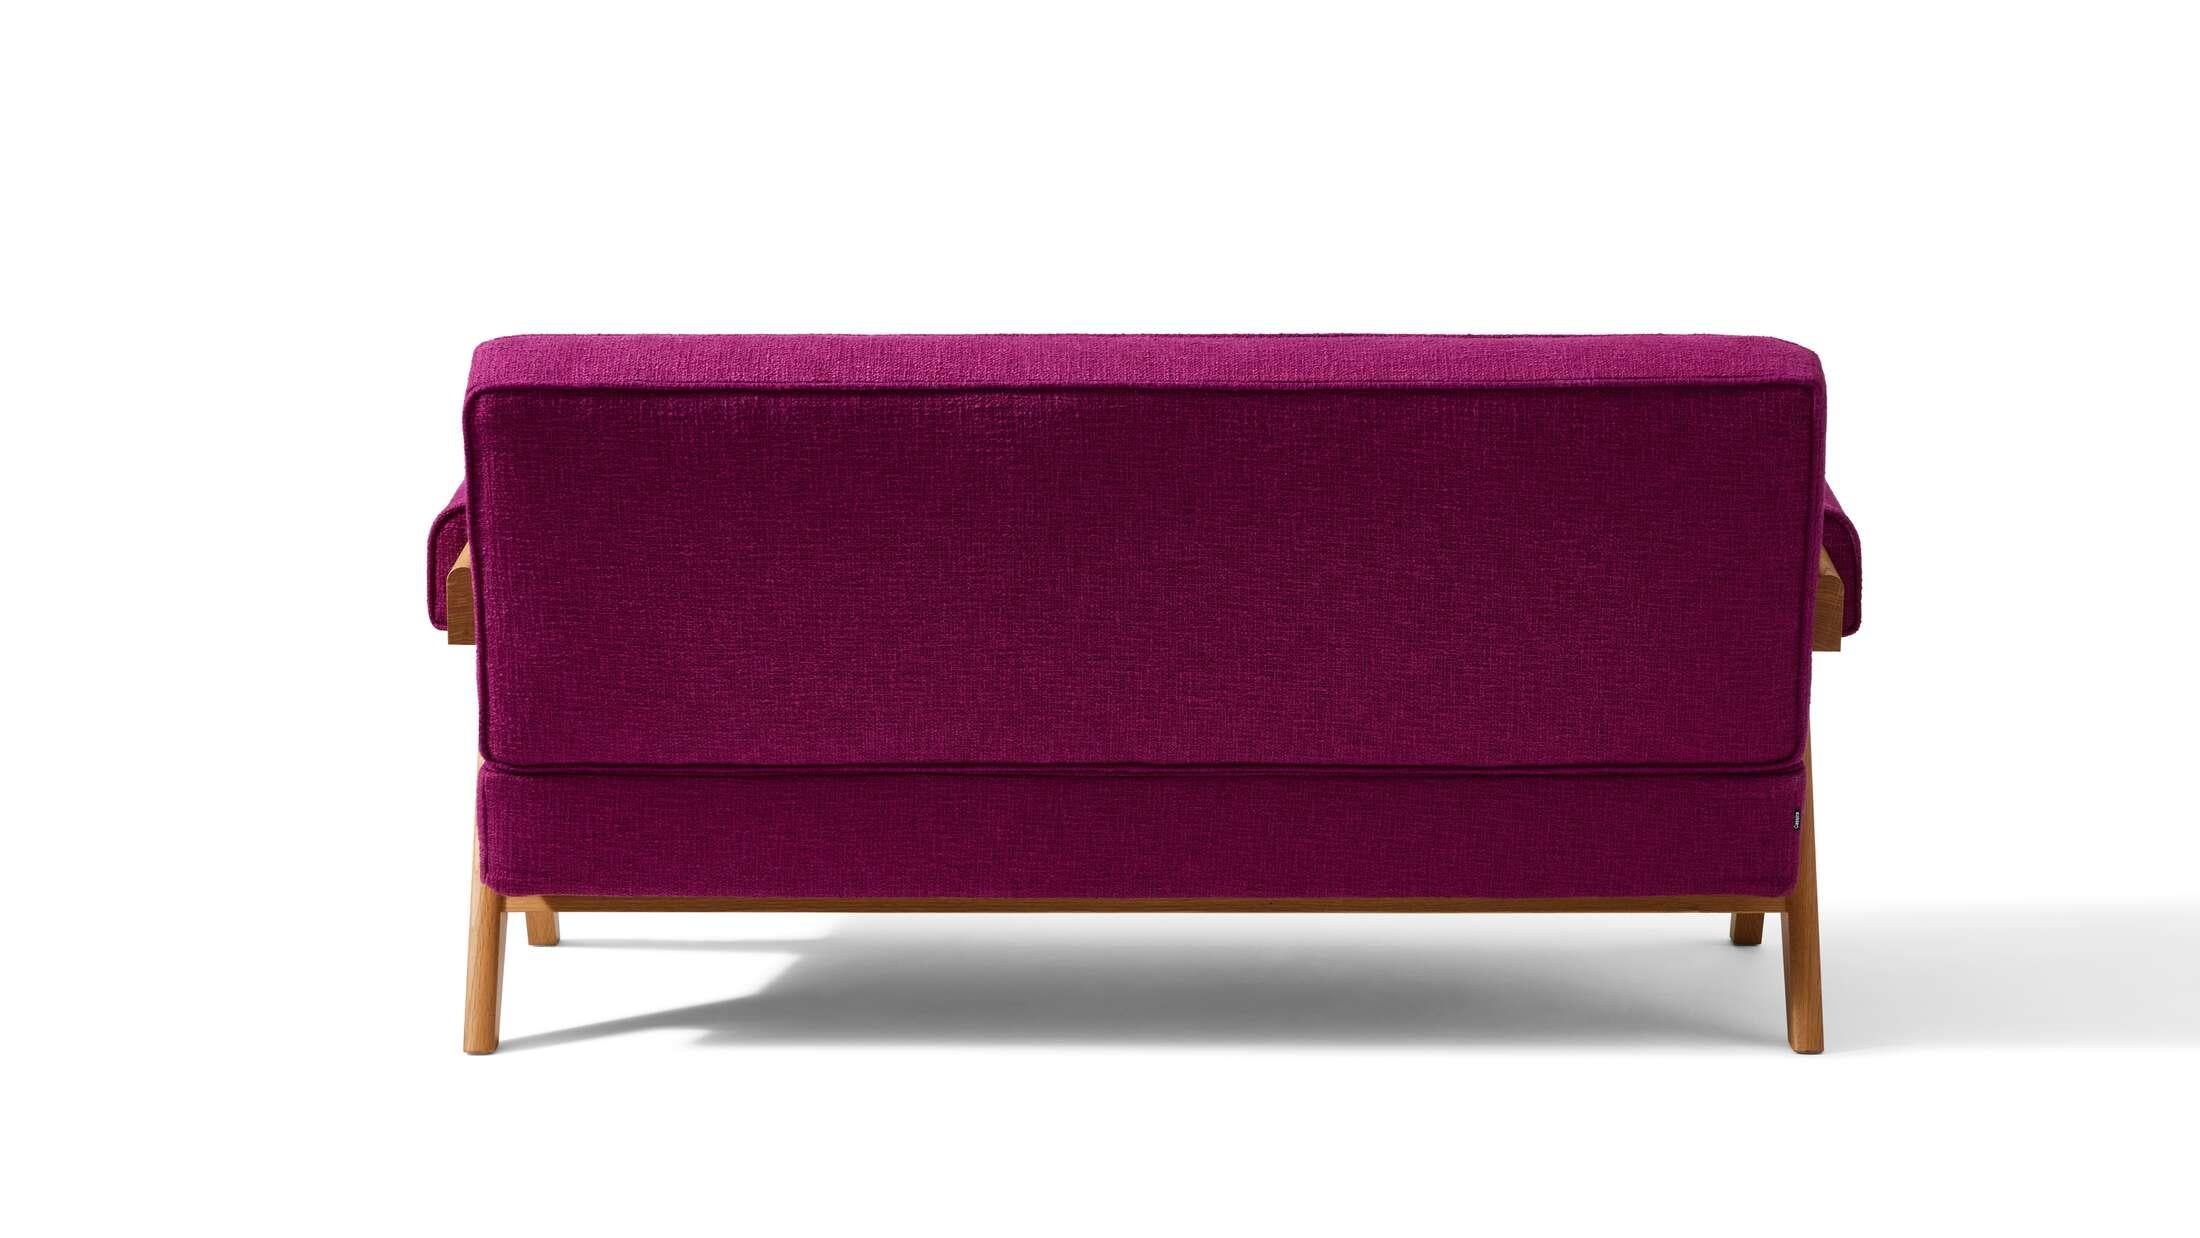 Italian Pierre Jeanneret Capitol Complex Sofa Settee in Purple for Cassina, Italy - New  For Sale